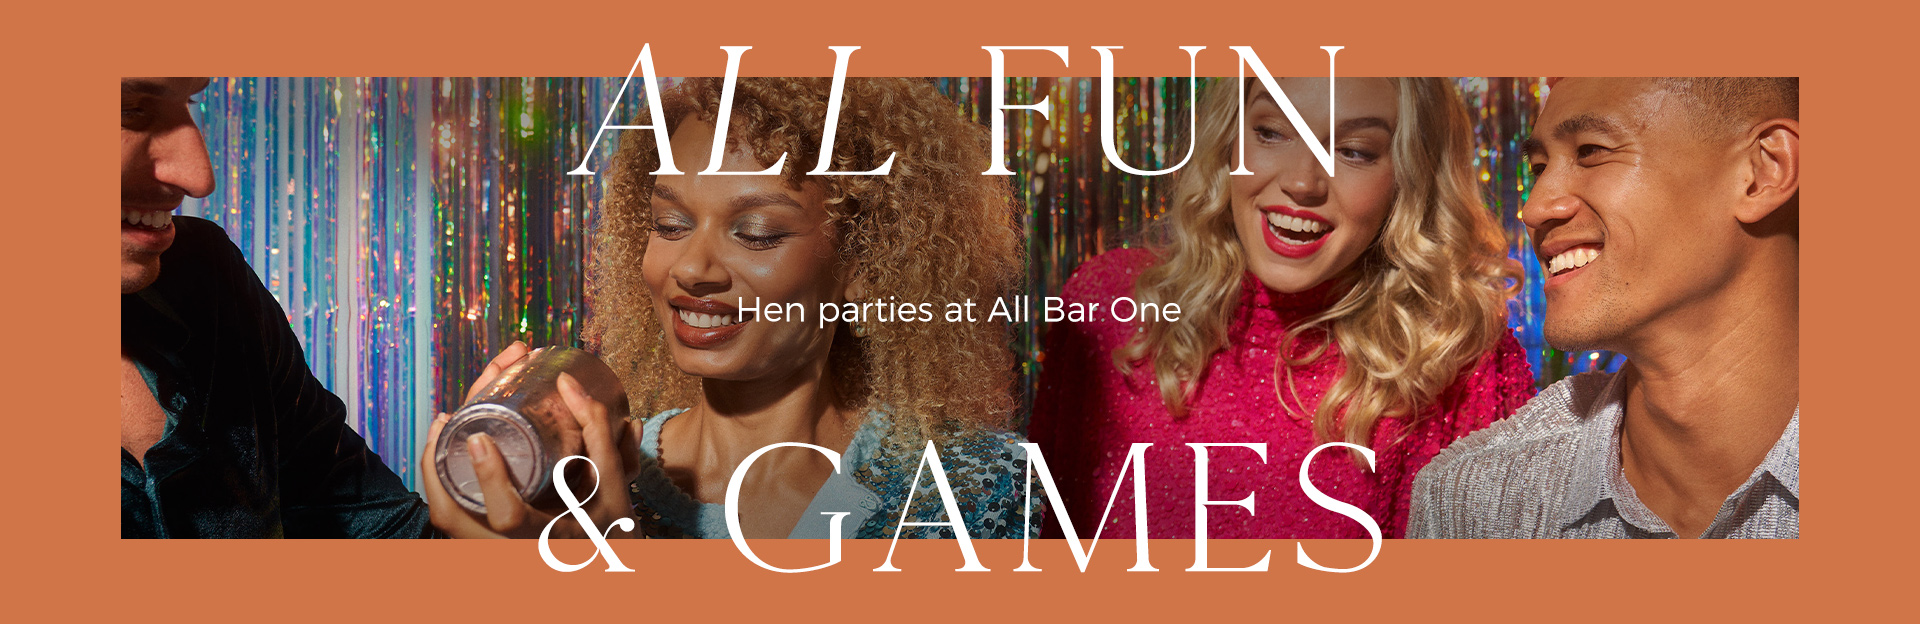 Hen parties at All Bar One Cannon Street